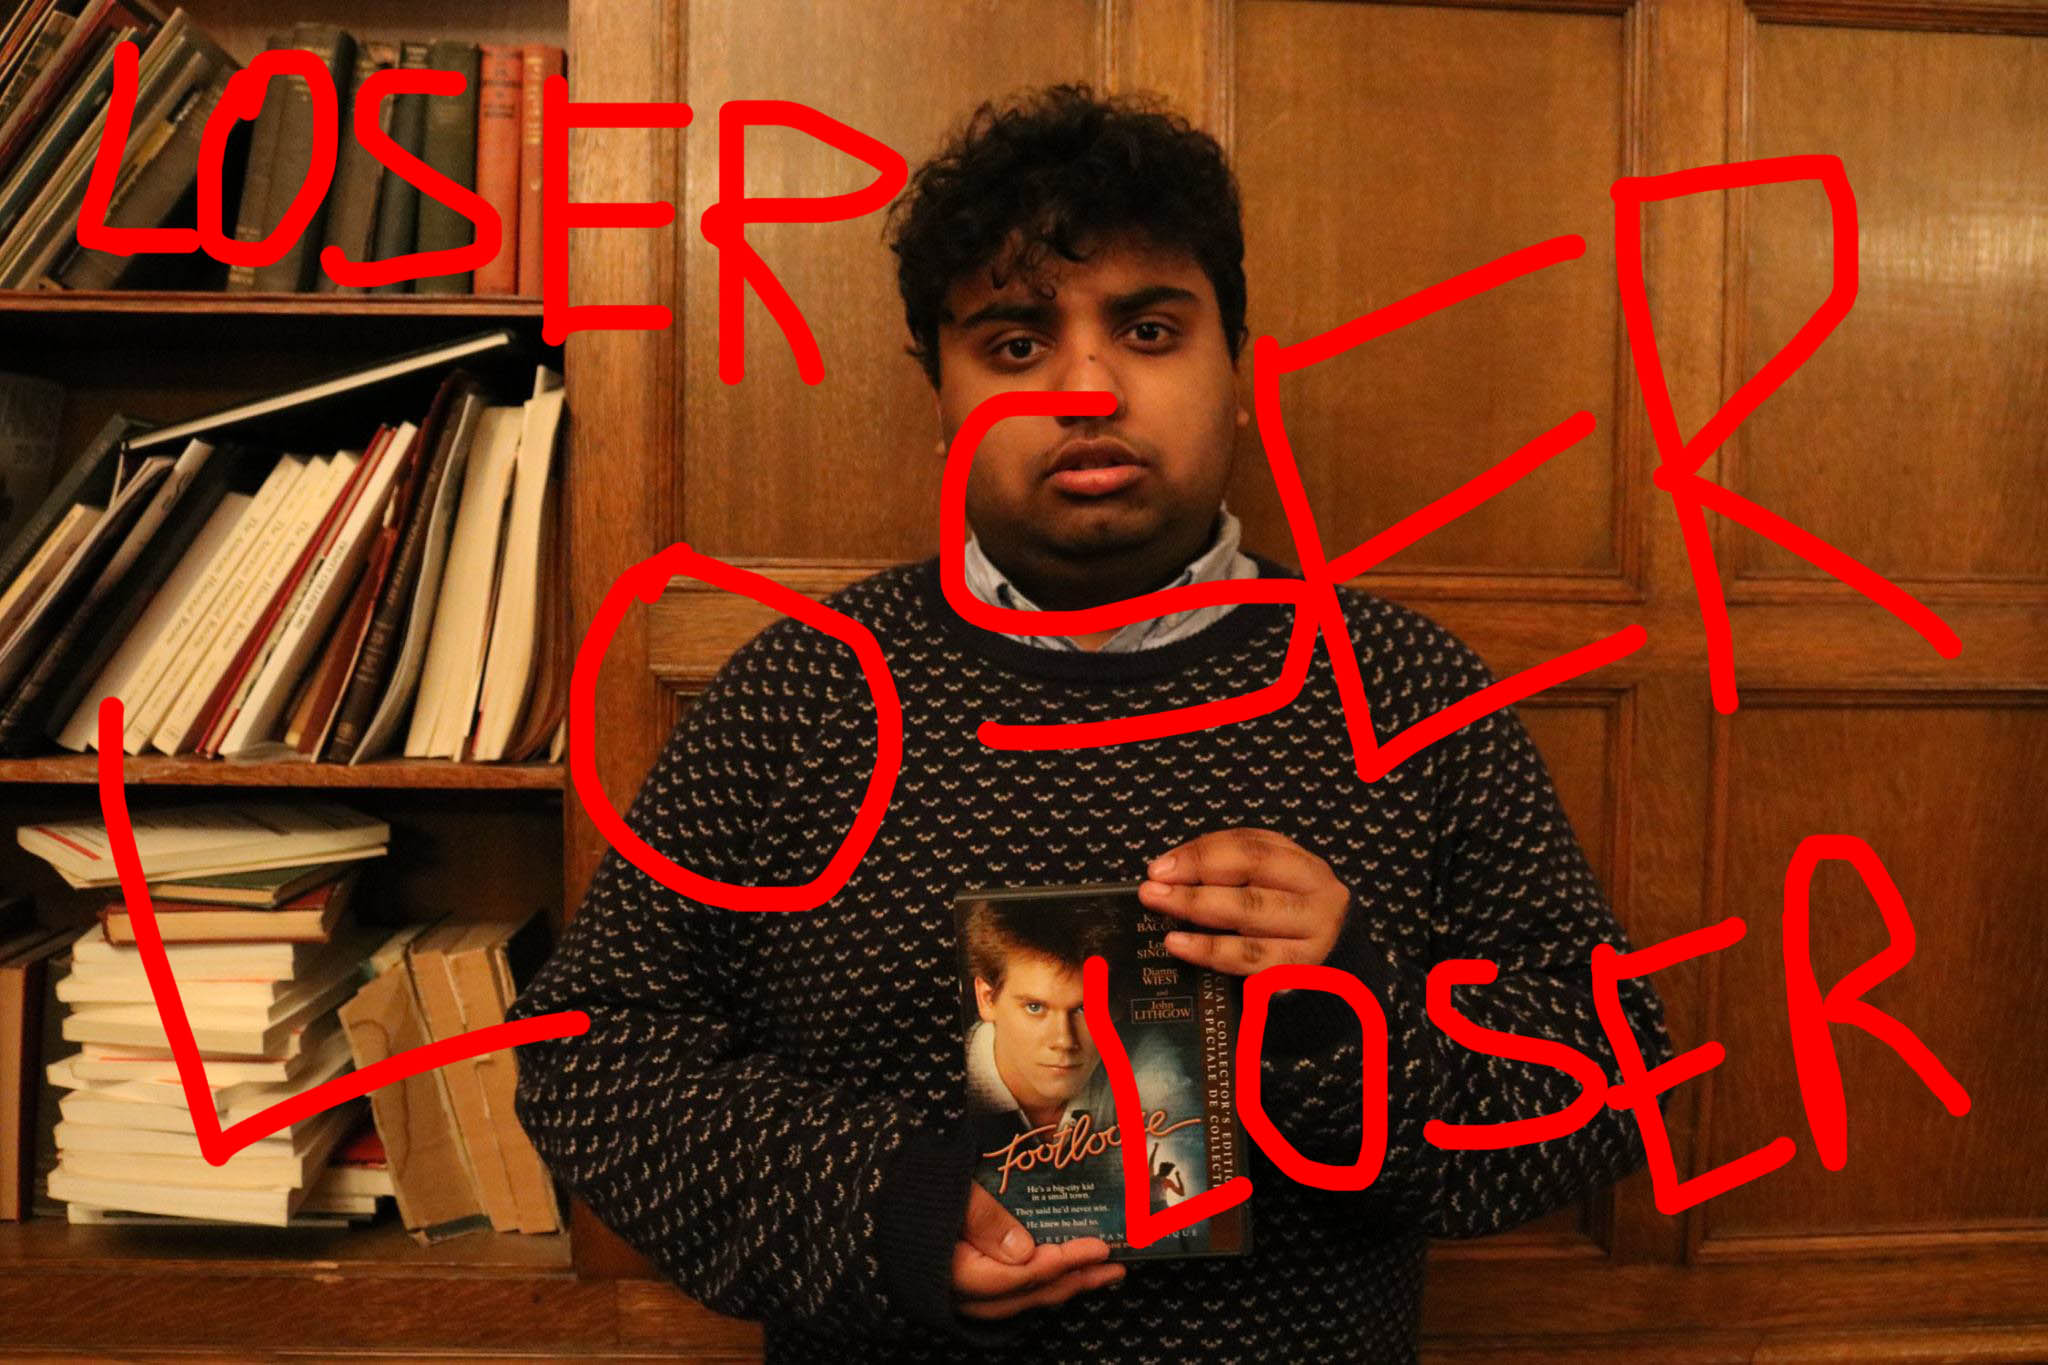 Photo of Avneet with the words "LOSER" written over him.